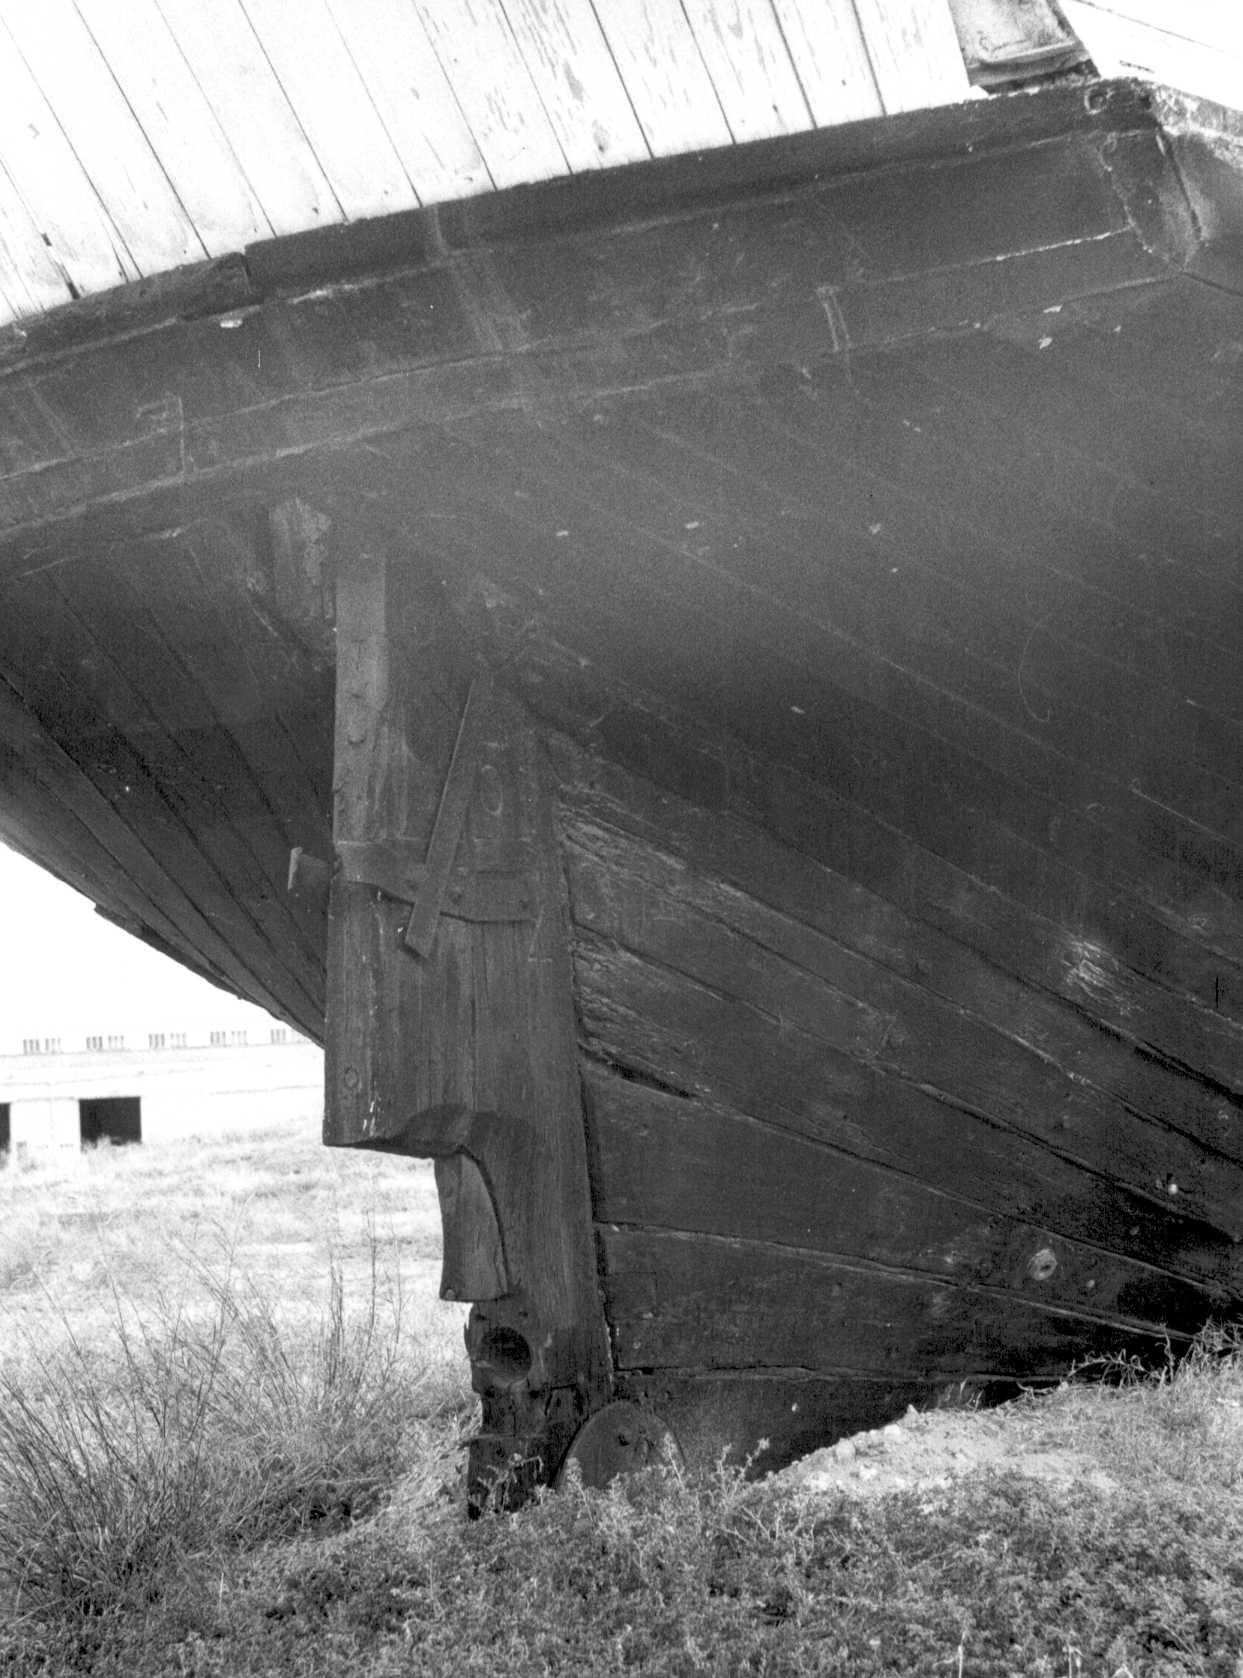 This image shows stern timbers.